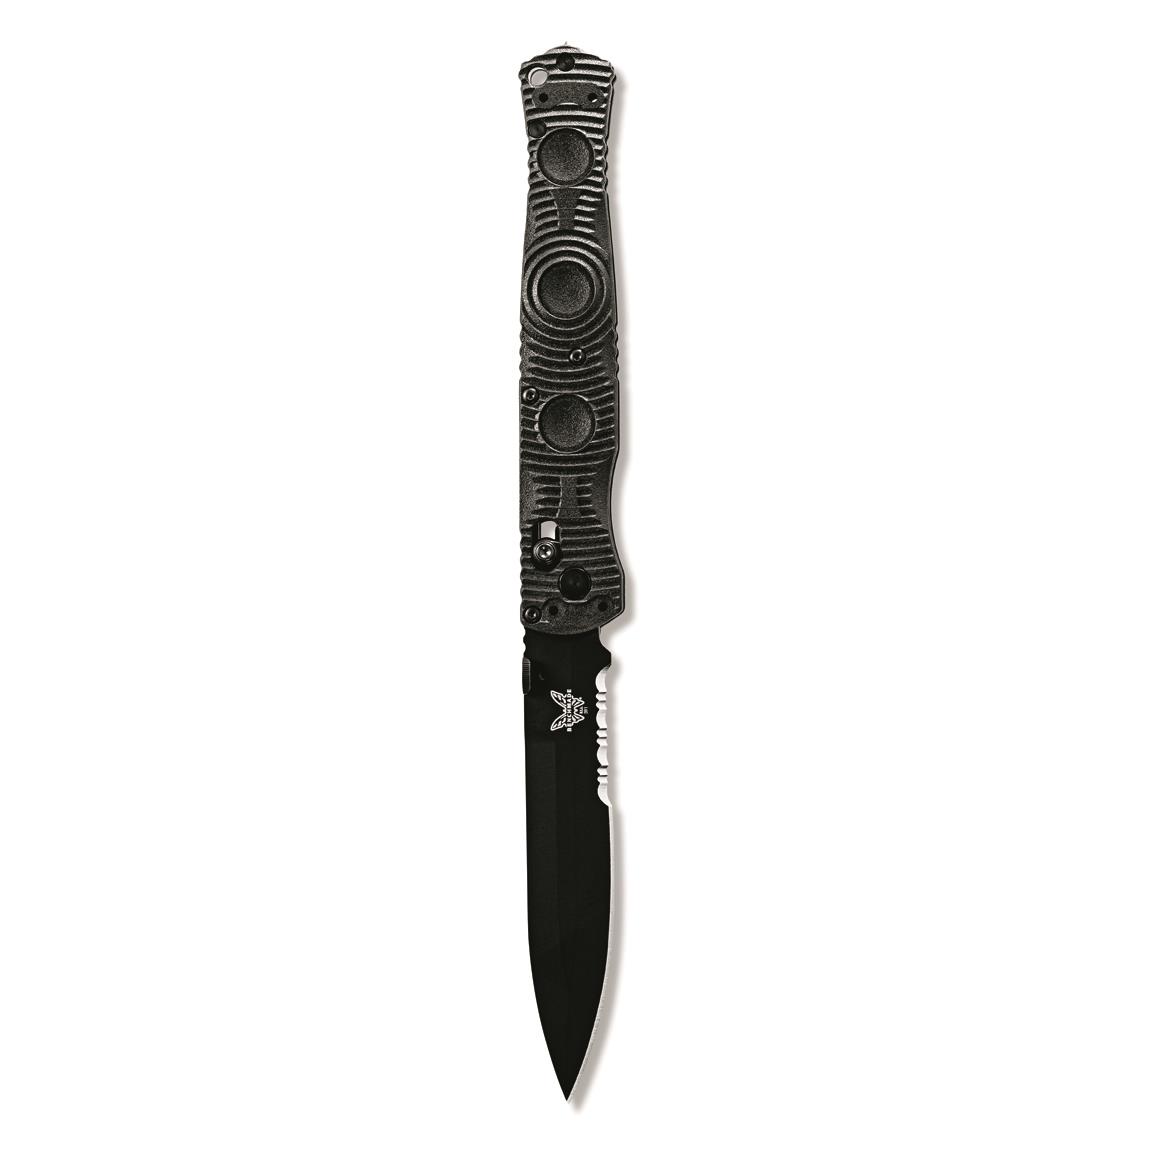 Benchmade 585 Barrage Axis-assist Folding Knife With Manual Knife Sharpener  : Target